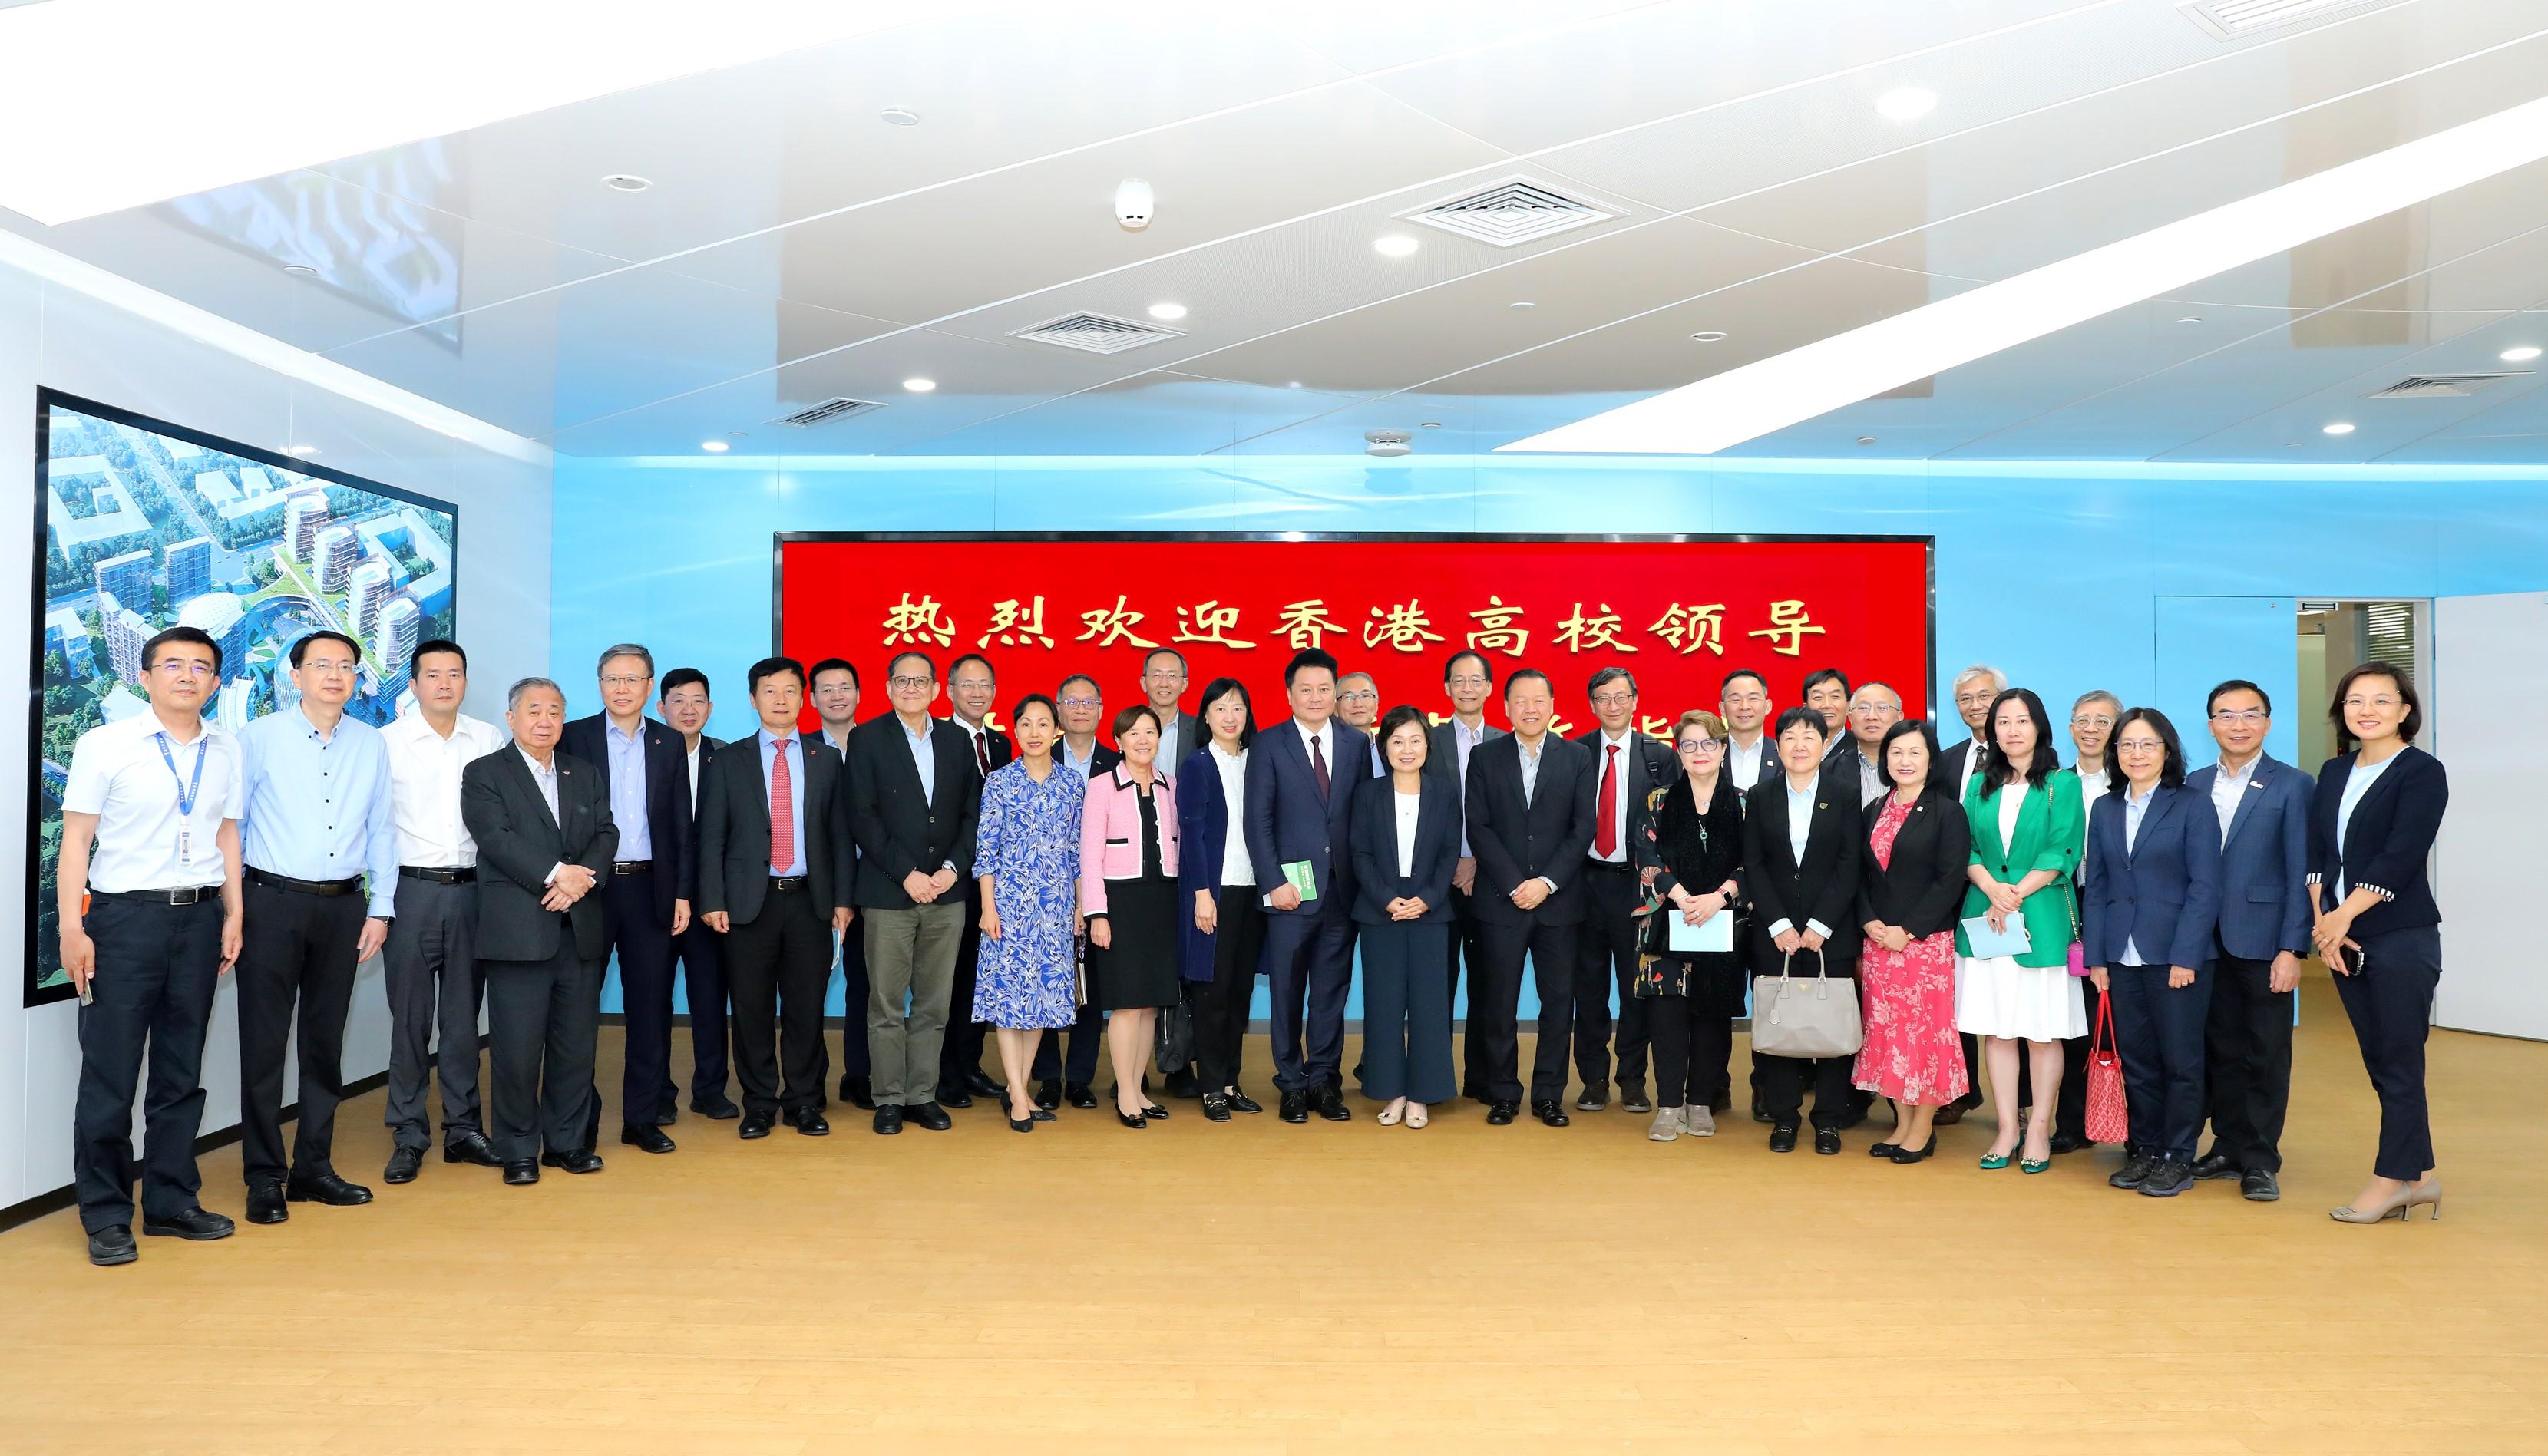 The Secretary for Education, Dr Choi Yuk-lin, is leading a delegation of Hong Kong higher education institutions to visit Beijing for two consecutive days (May 8 and 9). They toured the Changping Laboratory yesterday (May 8). Photo shows Dr Choi (front row, seventh right), the Permanent Secretary for Education, Ms Michelle Li (front row, seventh left), and other members of the delegation with the Director of the Changping Laboratory and academician of the Chinese Academy of Sciences, Professor Sunney Xie (front row, centre).